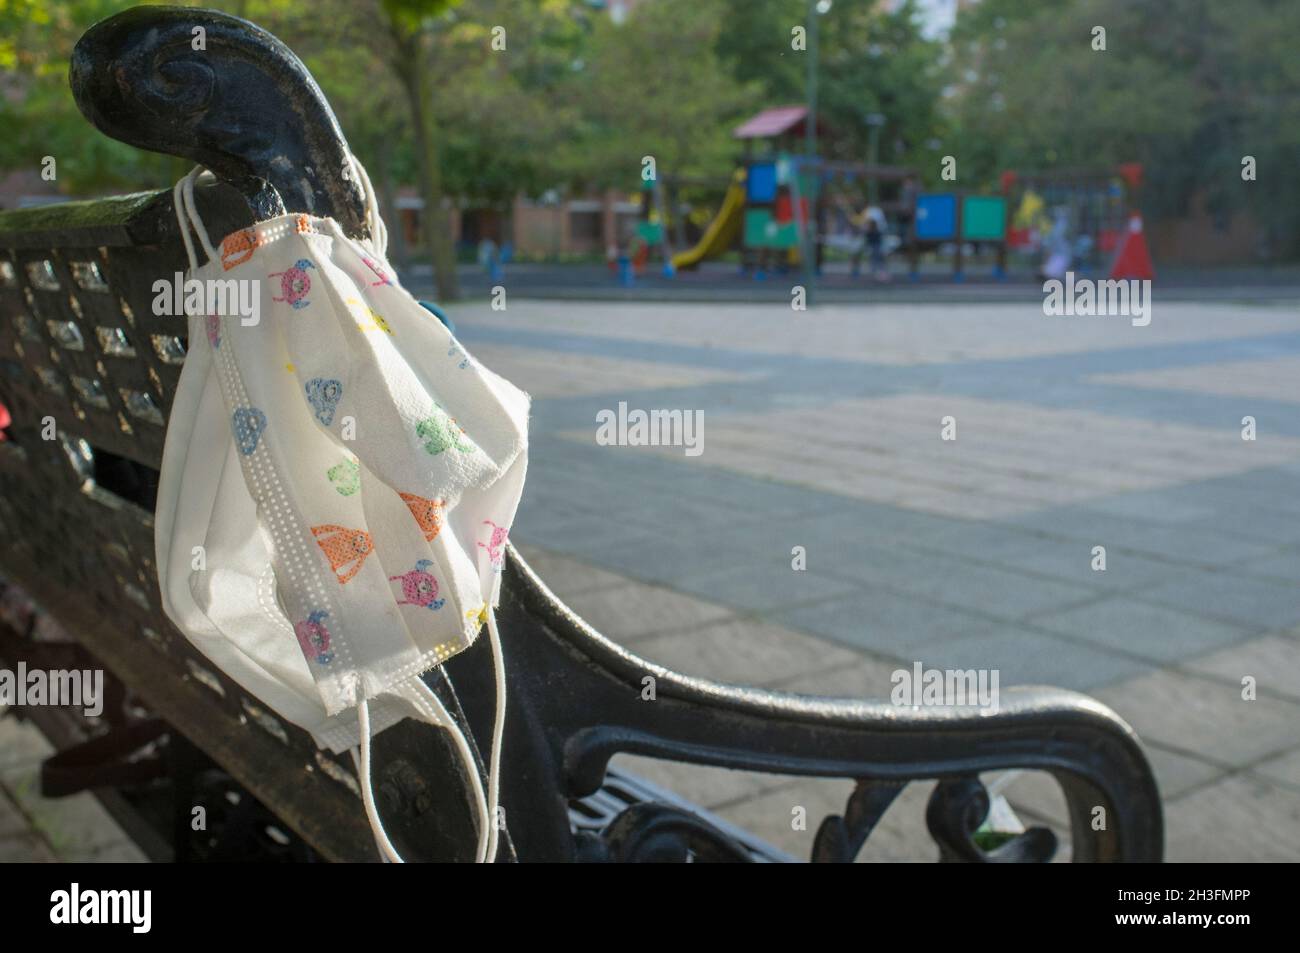 Playground bench with two face mask hooked. Covid-19 easing lockdown restrictions Stock Photo